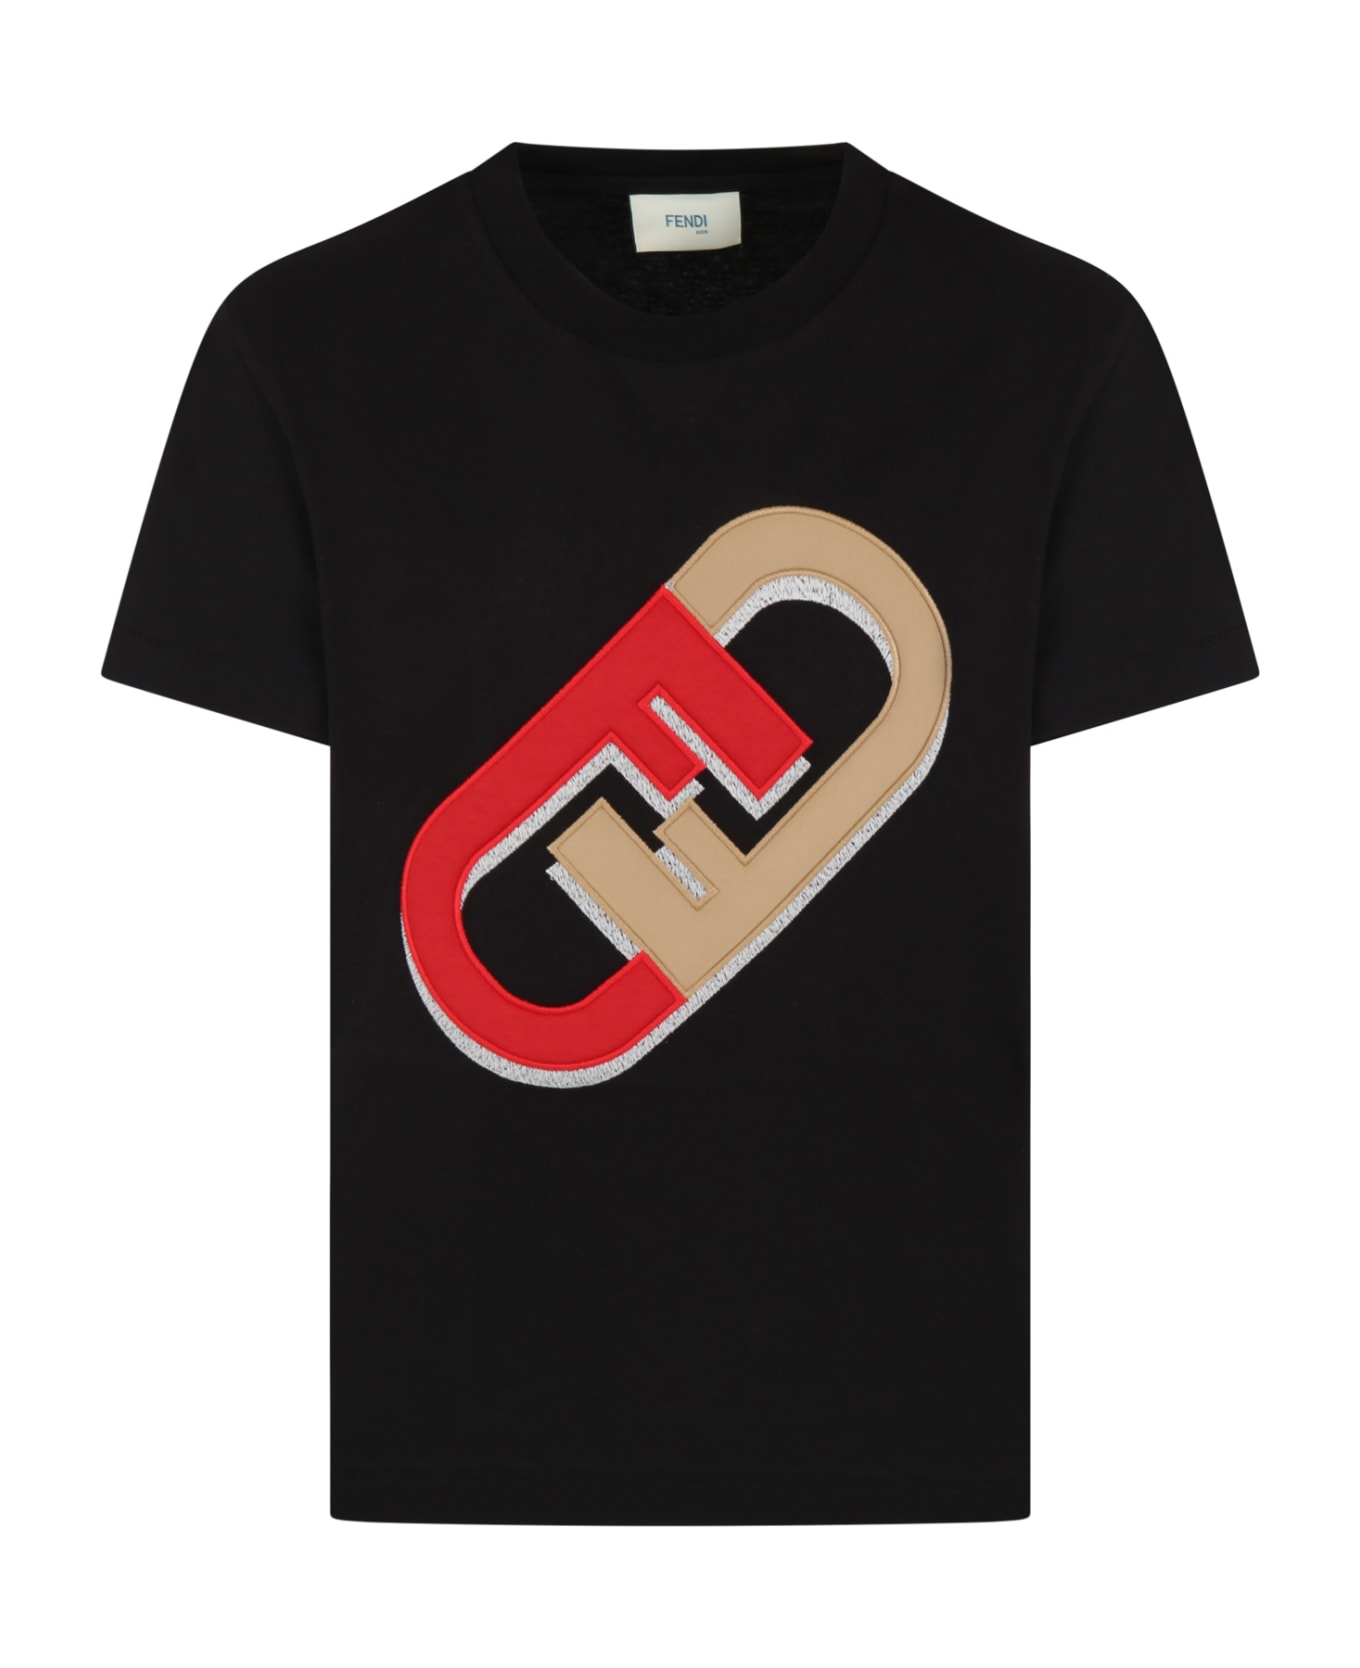 Fendi Black T-shirt For Kids With Iconic Double F - Black